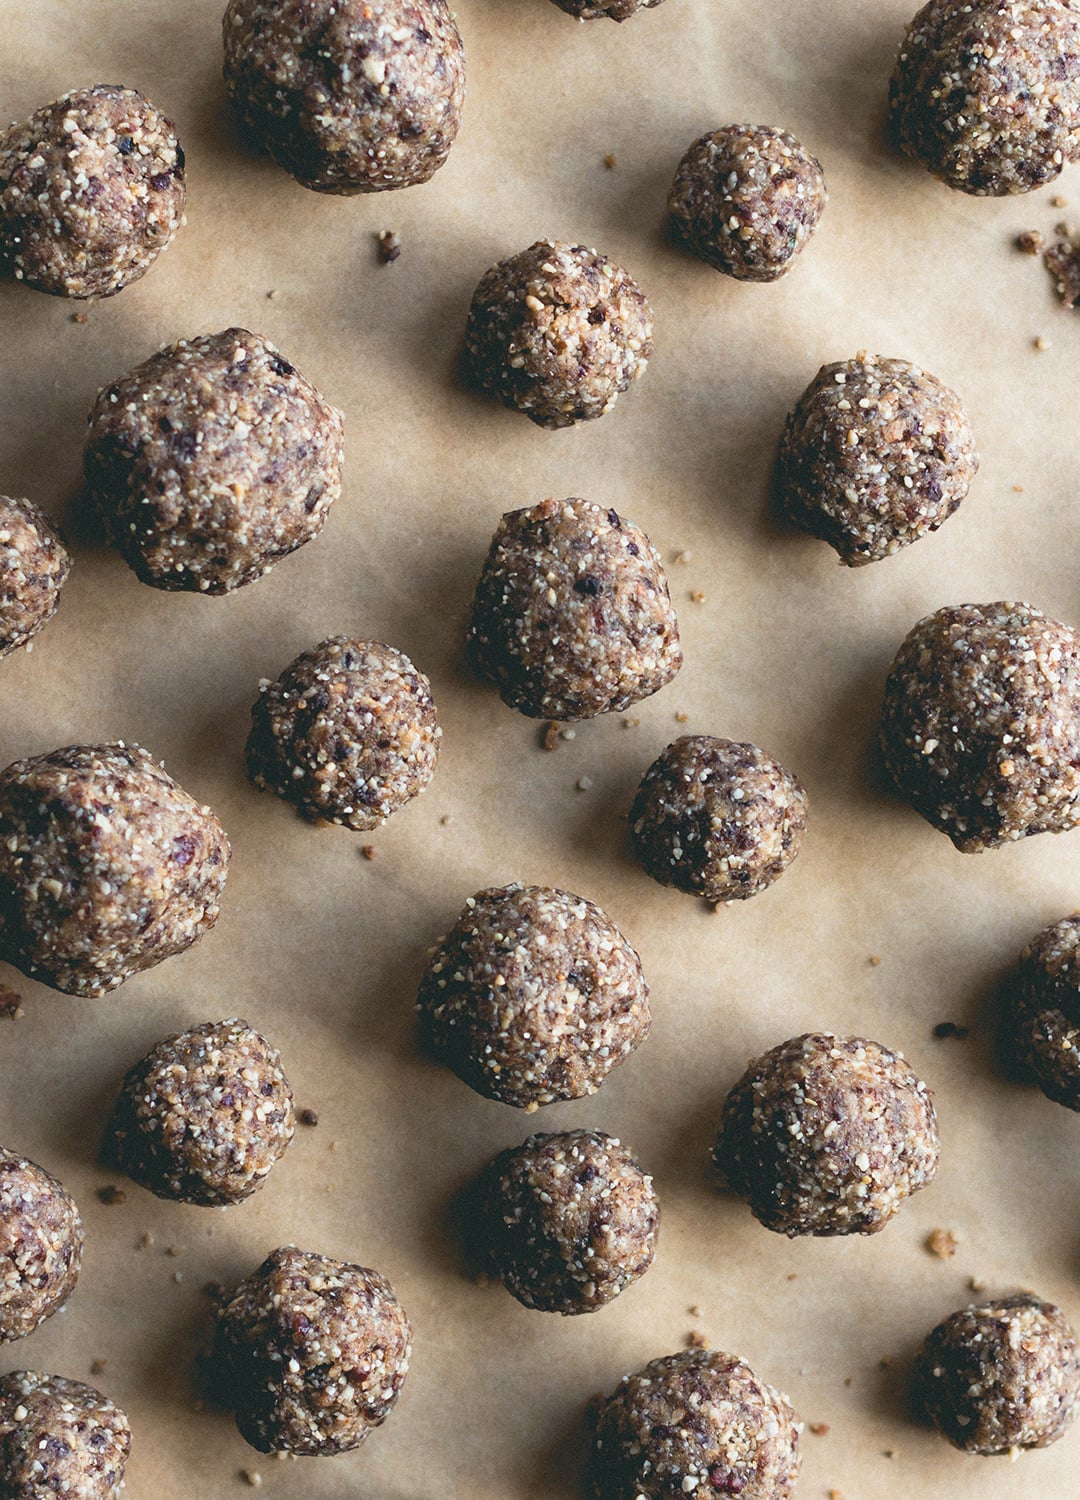 Cranberry Maca Baobab Energy Bites (raw vegan) - these energy balls are PACKED with superfoods and nutrients! Sweet, tangy, and delicious! | thehealthfulideas.com